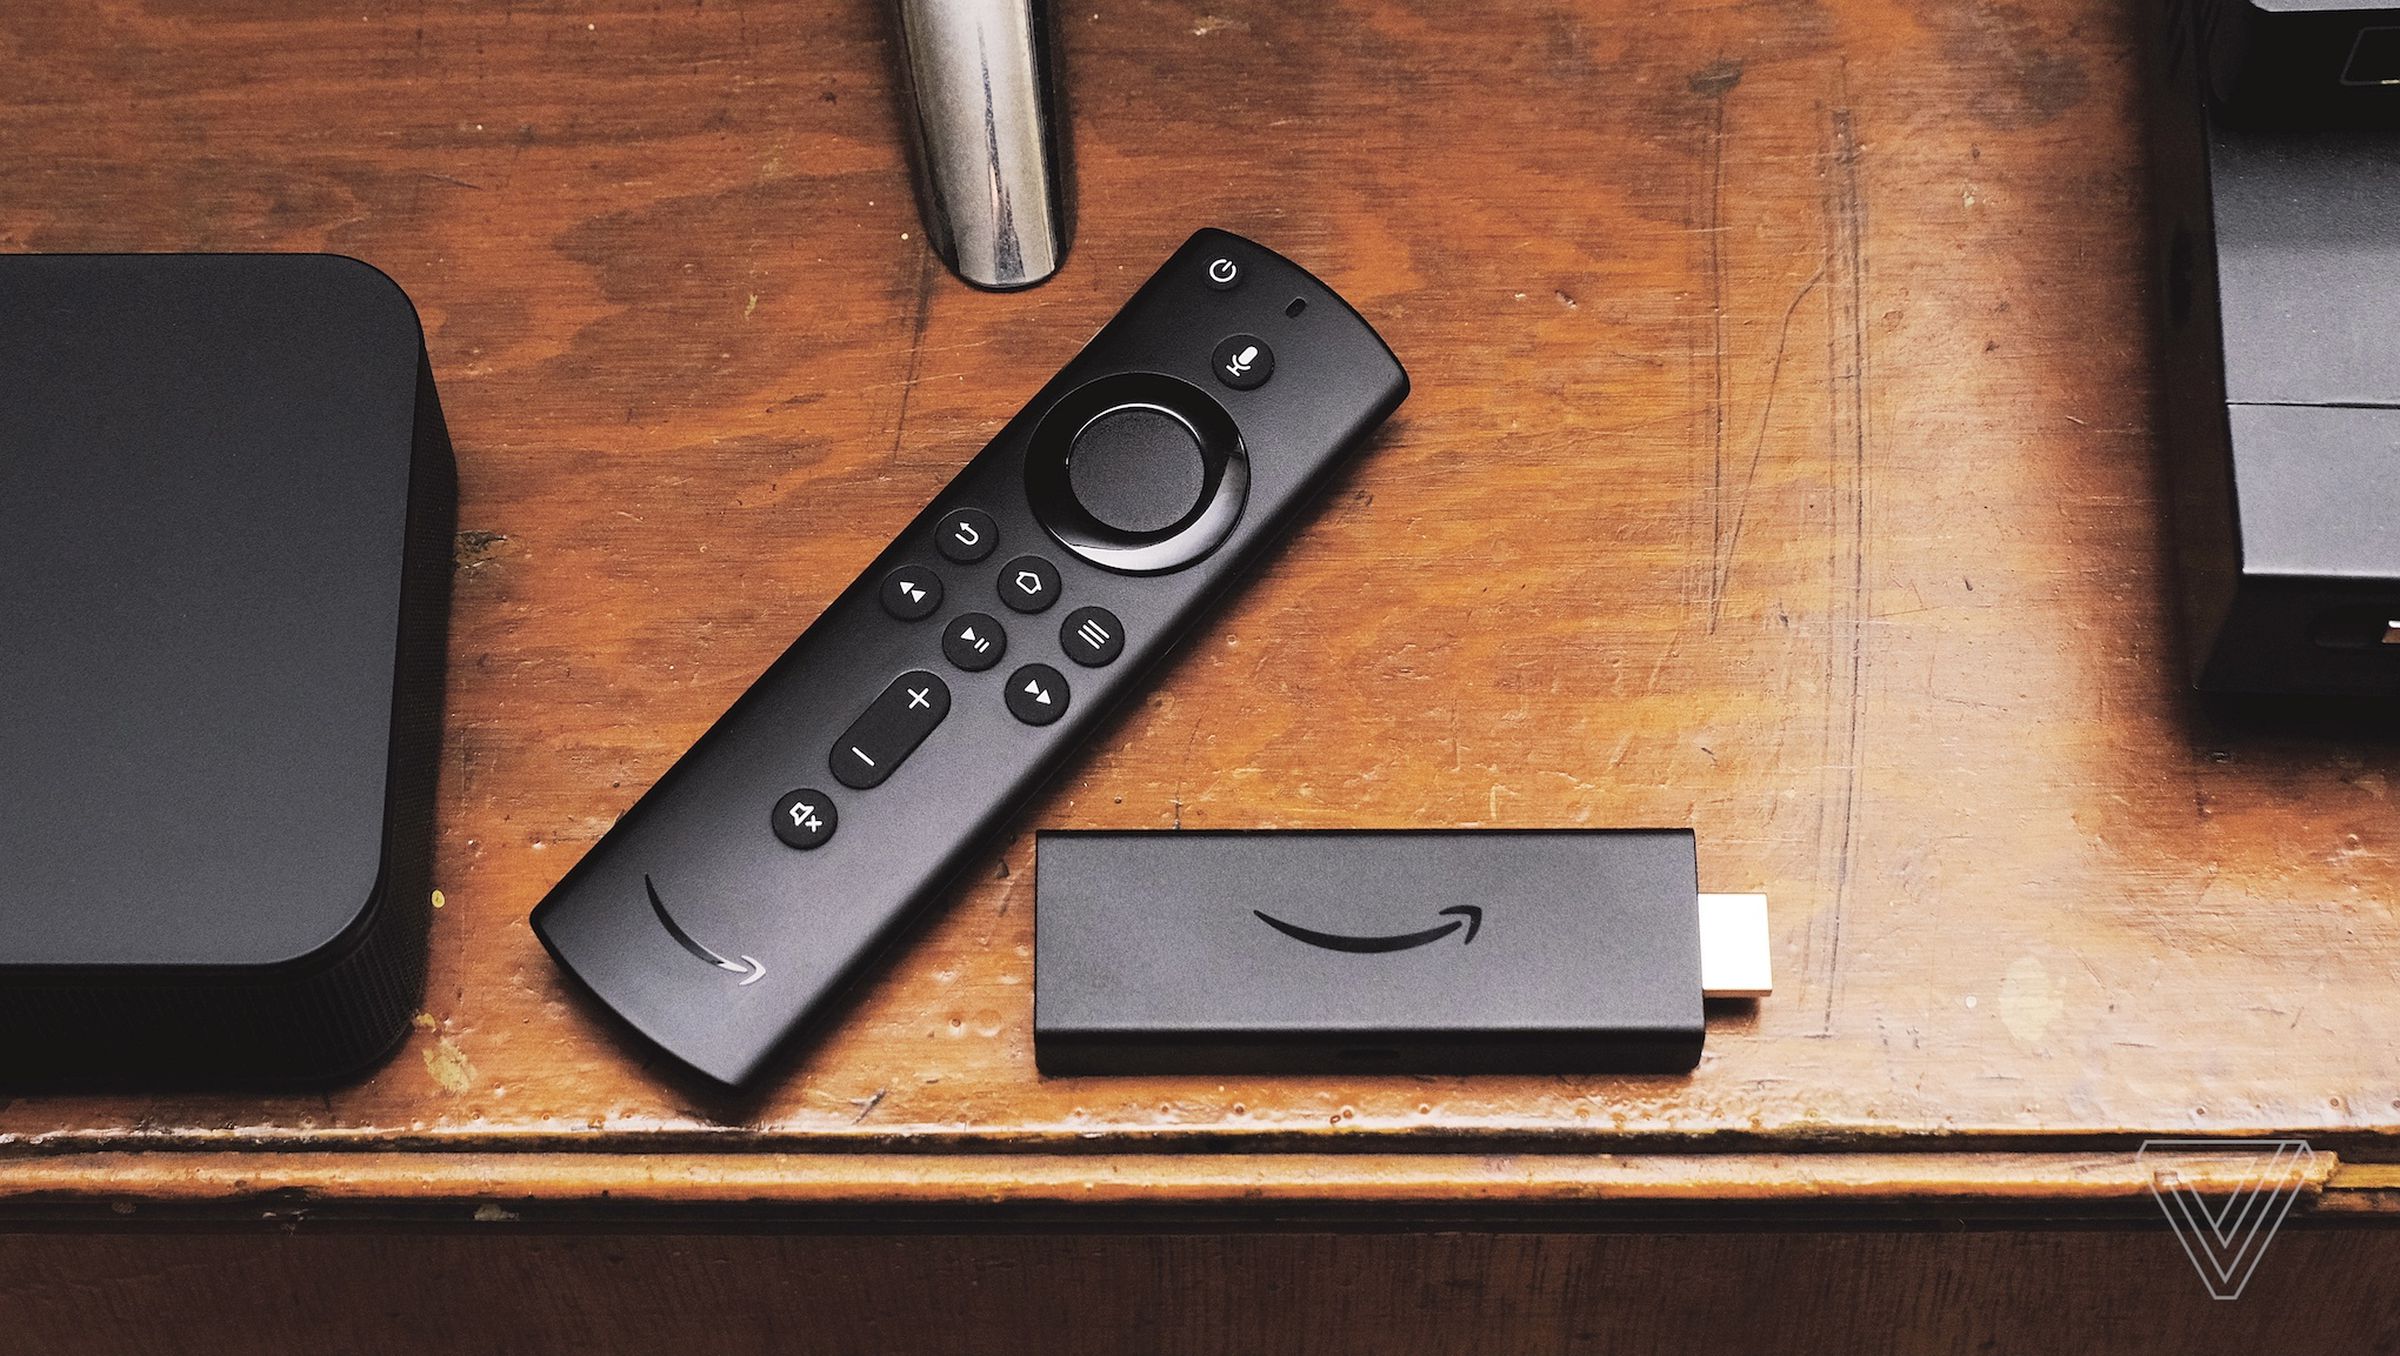 Amazon Fire TV Stick (2020) review: just get a 4K model - The Verge